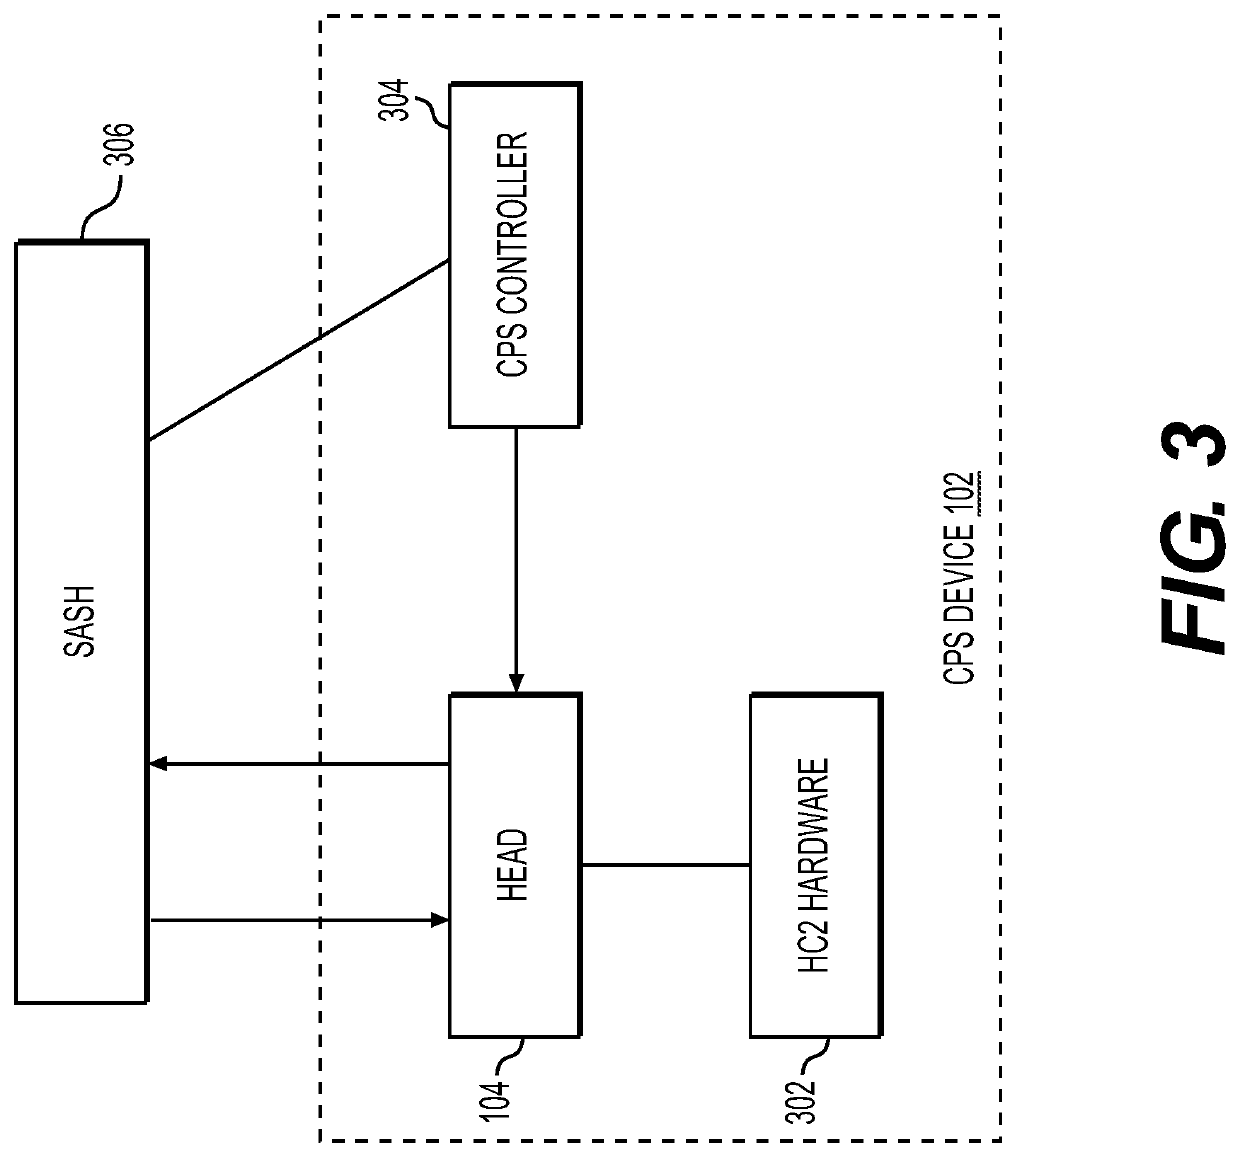 Systems and methods for embedded anomalies detector for cyber-physical systems